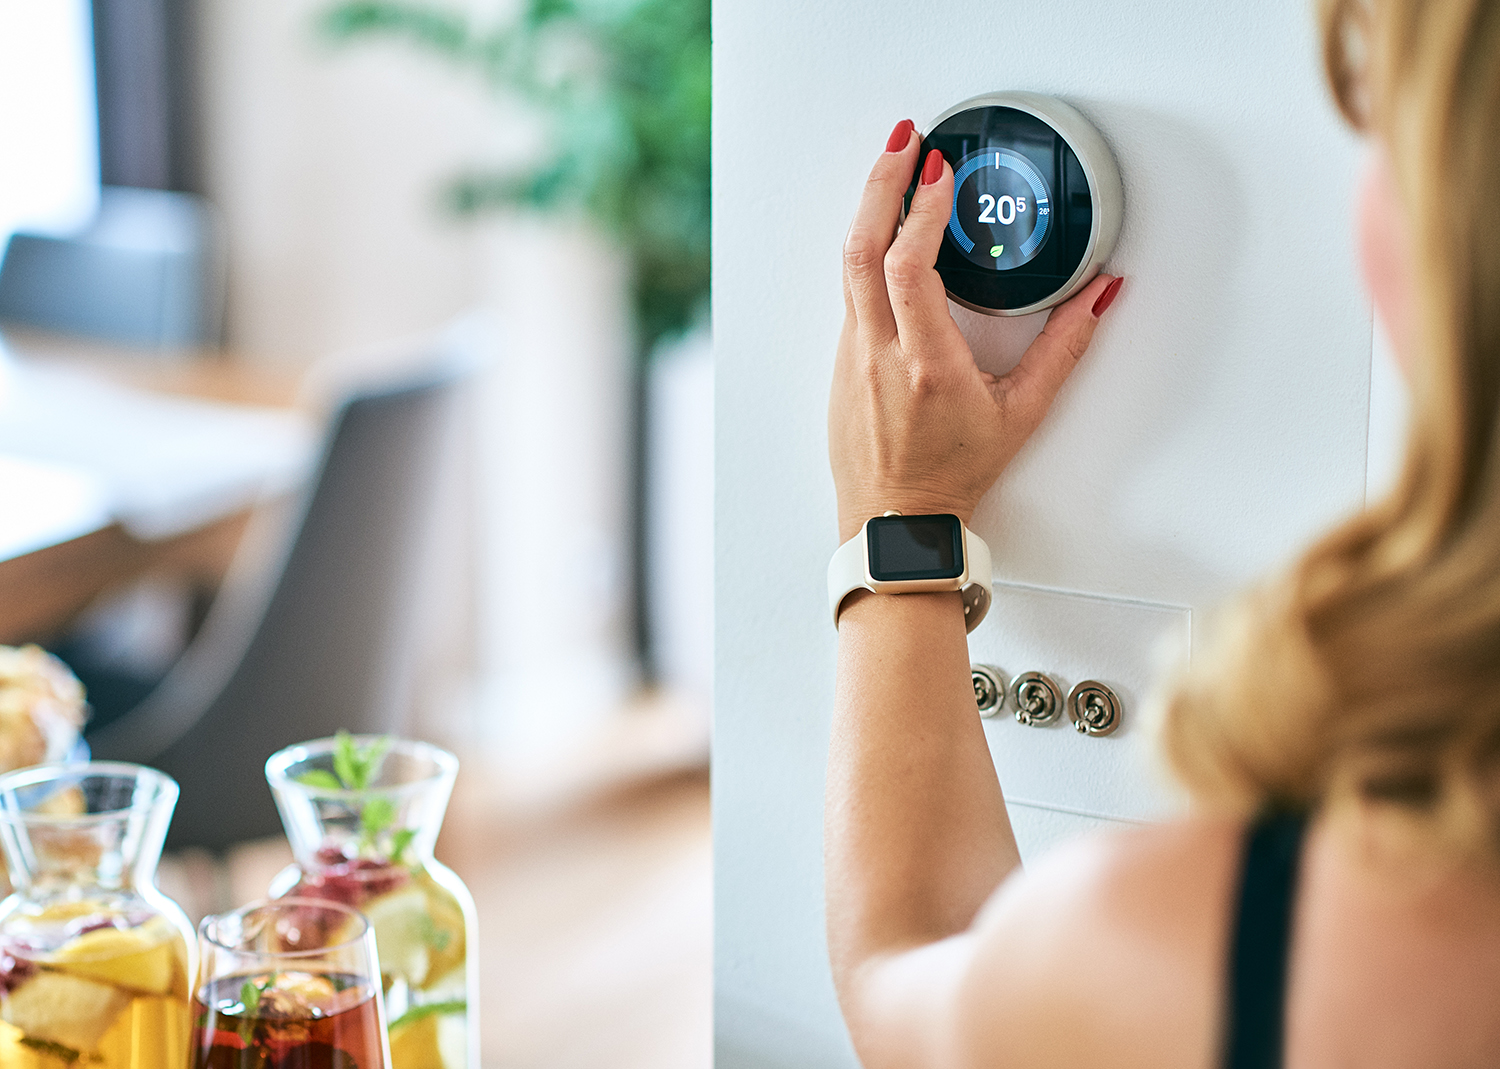 Woke up sweating': Some Texans shocked to find their smart thermostats were  raised remotely